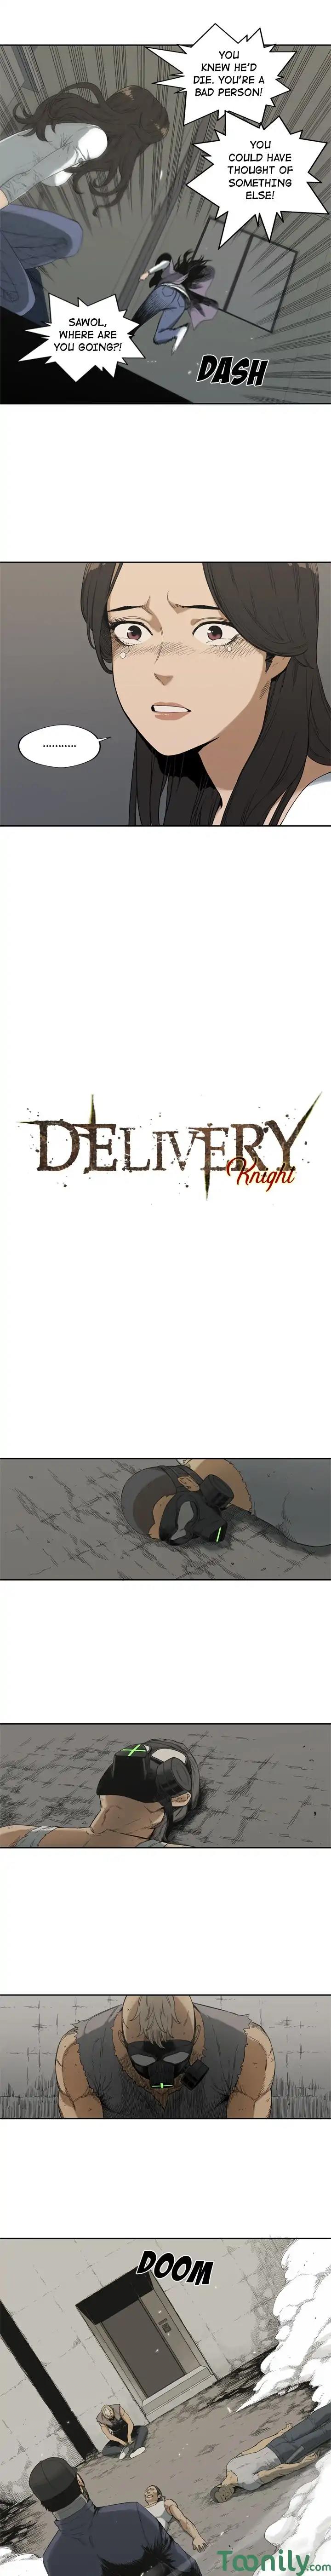 Delivery Knight Episode 6